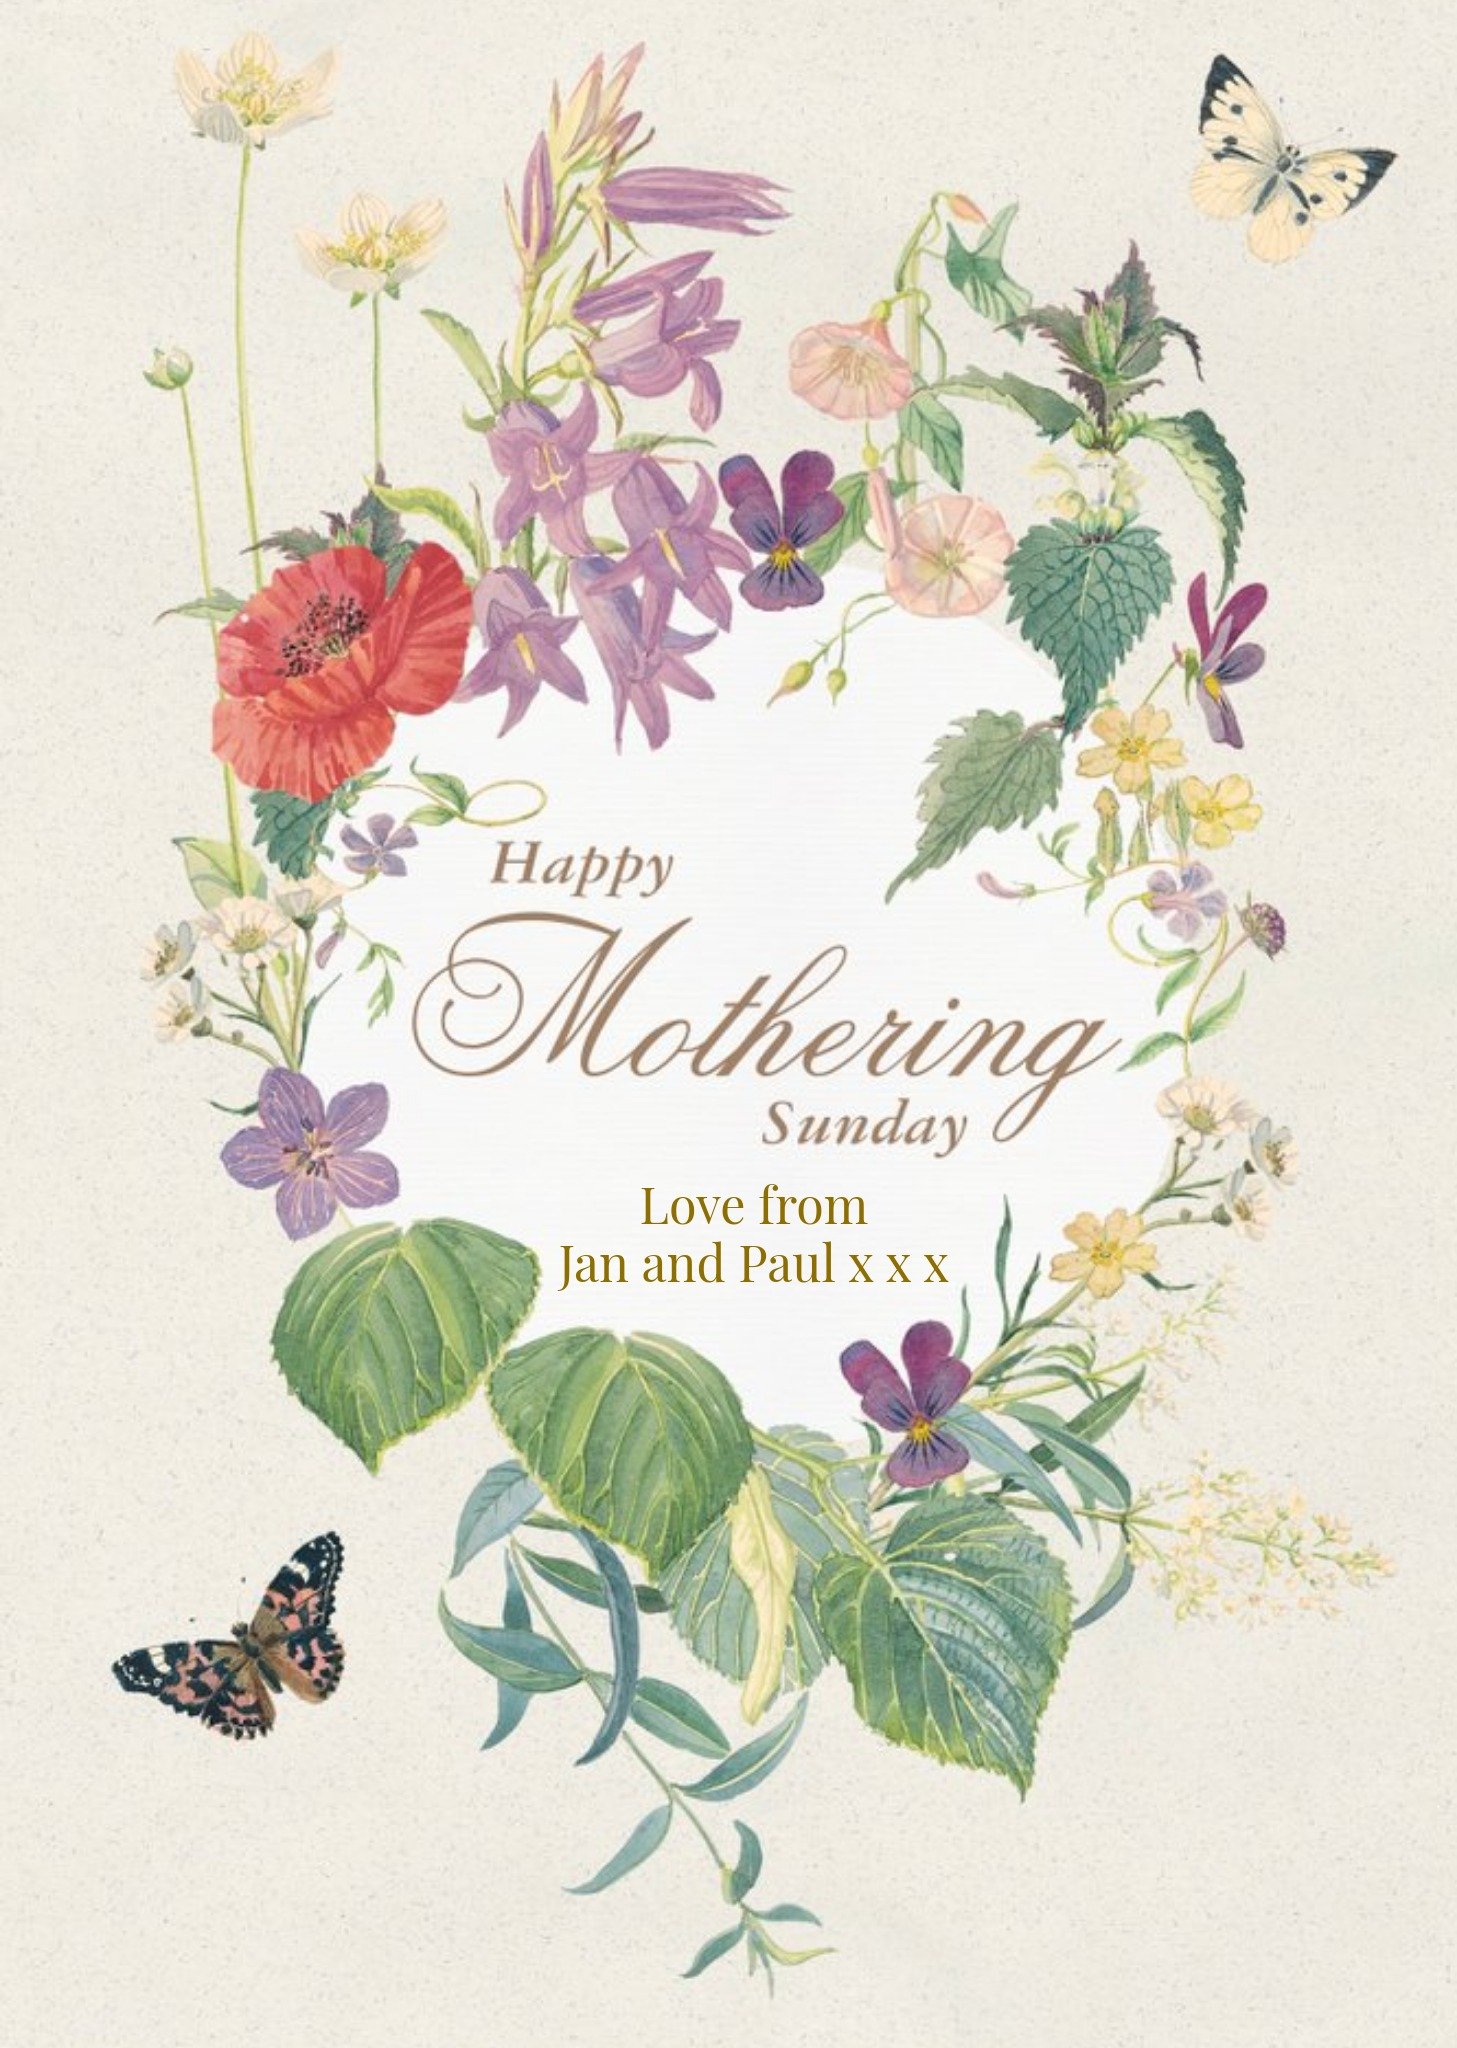 Edwardian Lady Spring Flowers And Butterflies Happy Mothering Sunday Card, Large